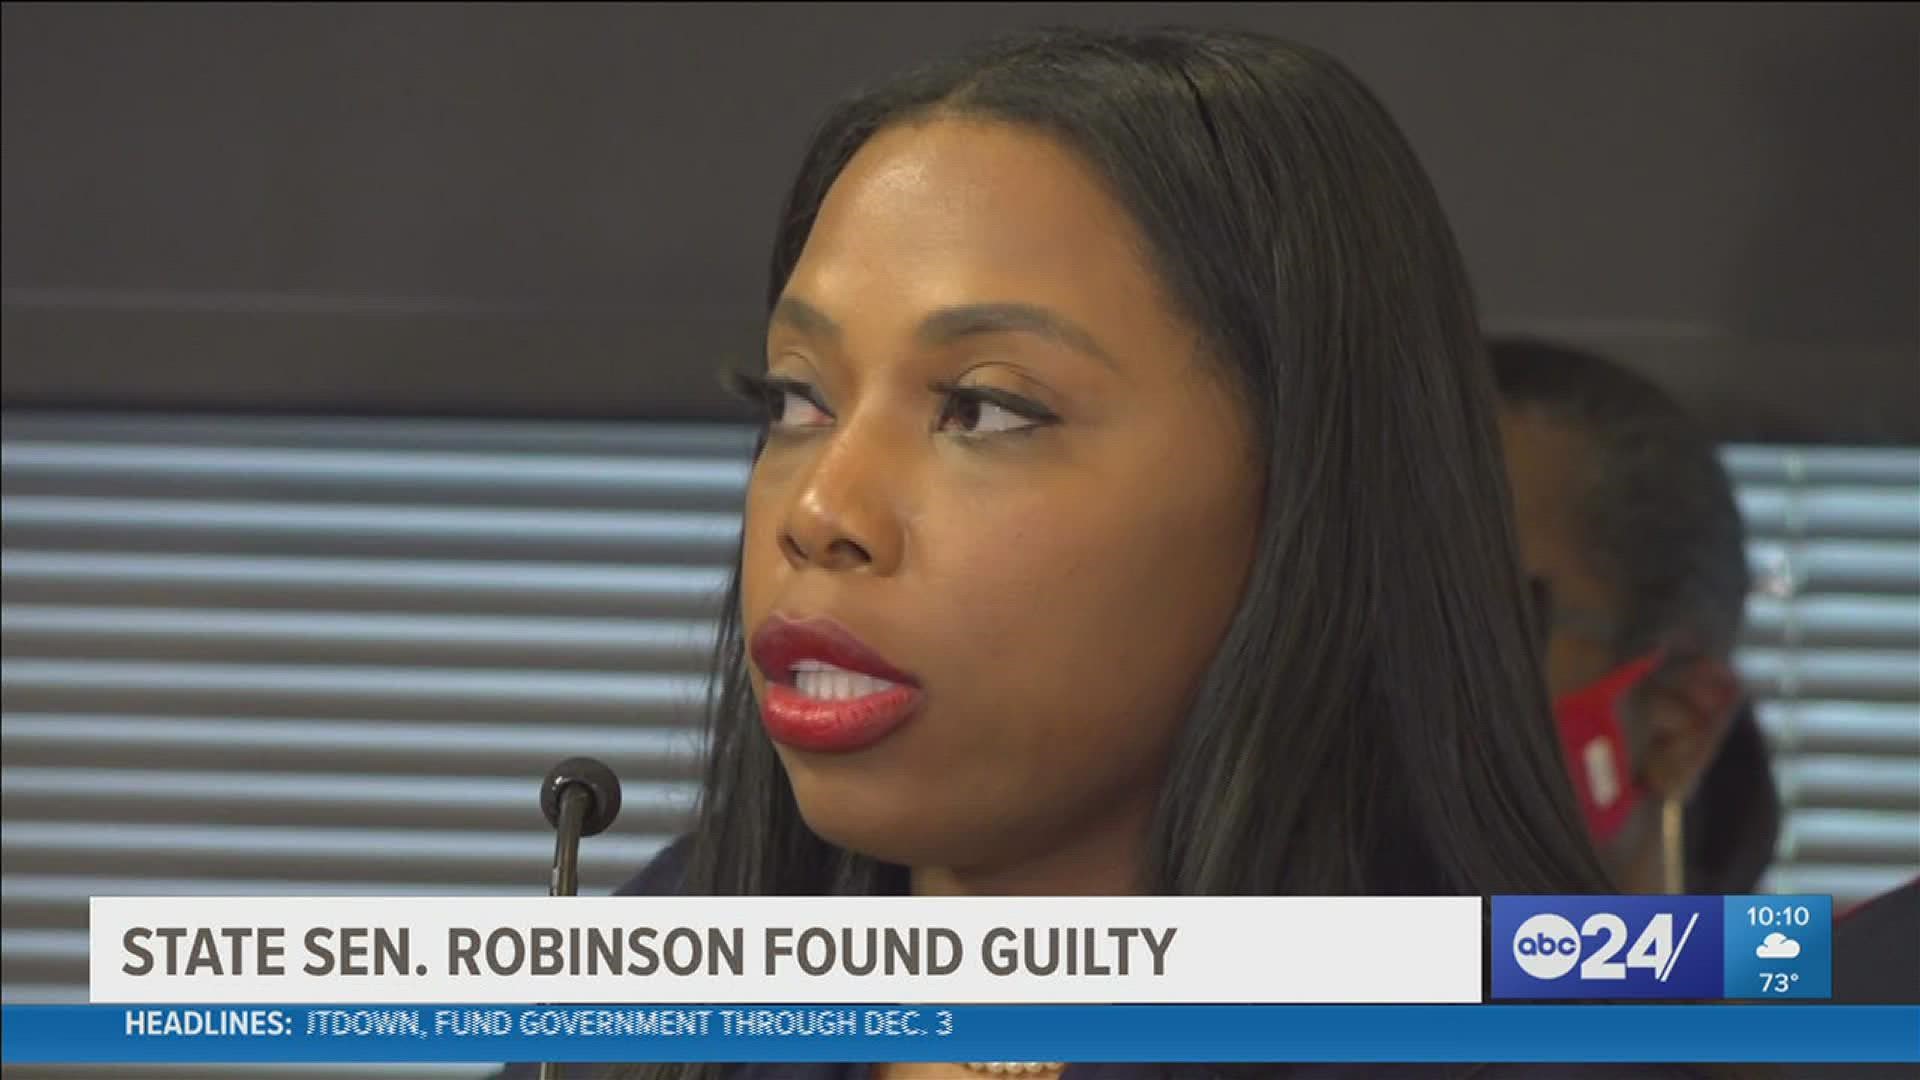 The jury convicted Robinson Thursday on four of the five counts that remained against her, all concerning wire fraud.